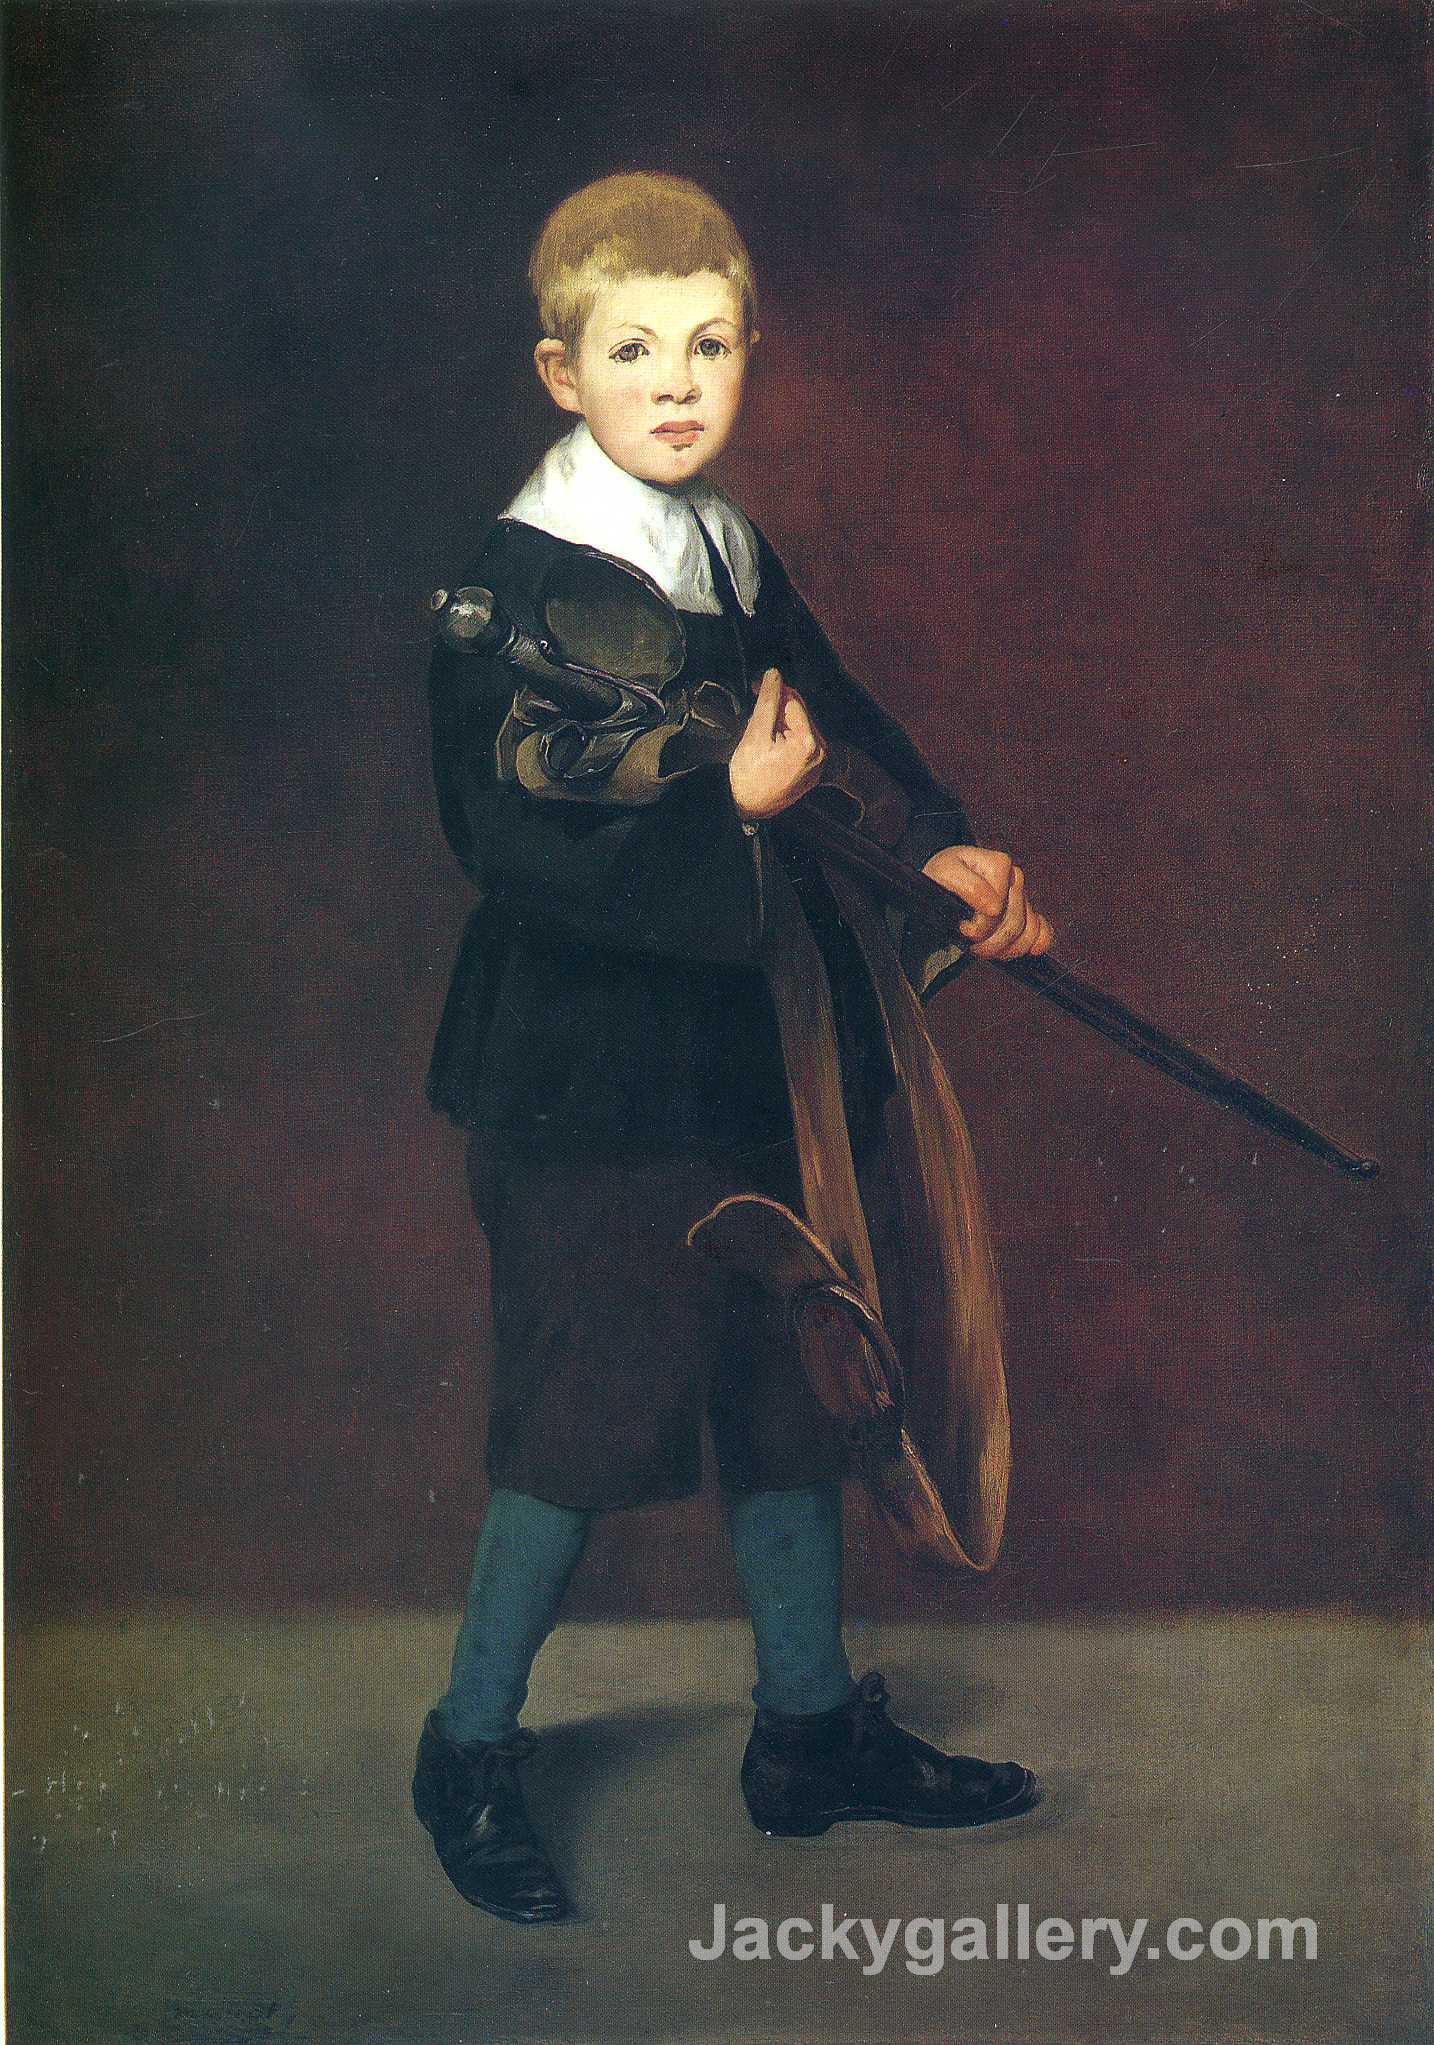 Boy with a Sword by Edouard Manet paintings reproduction